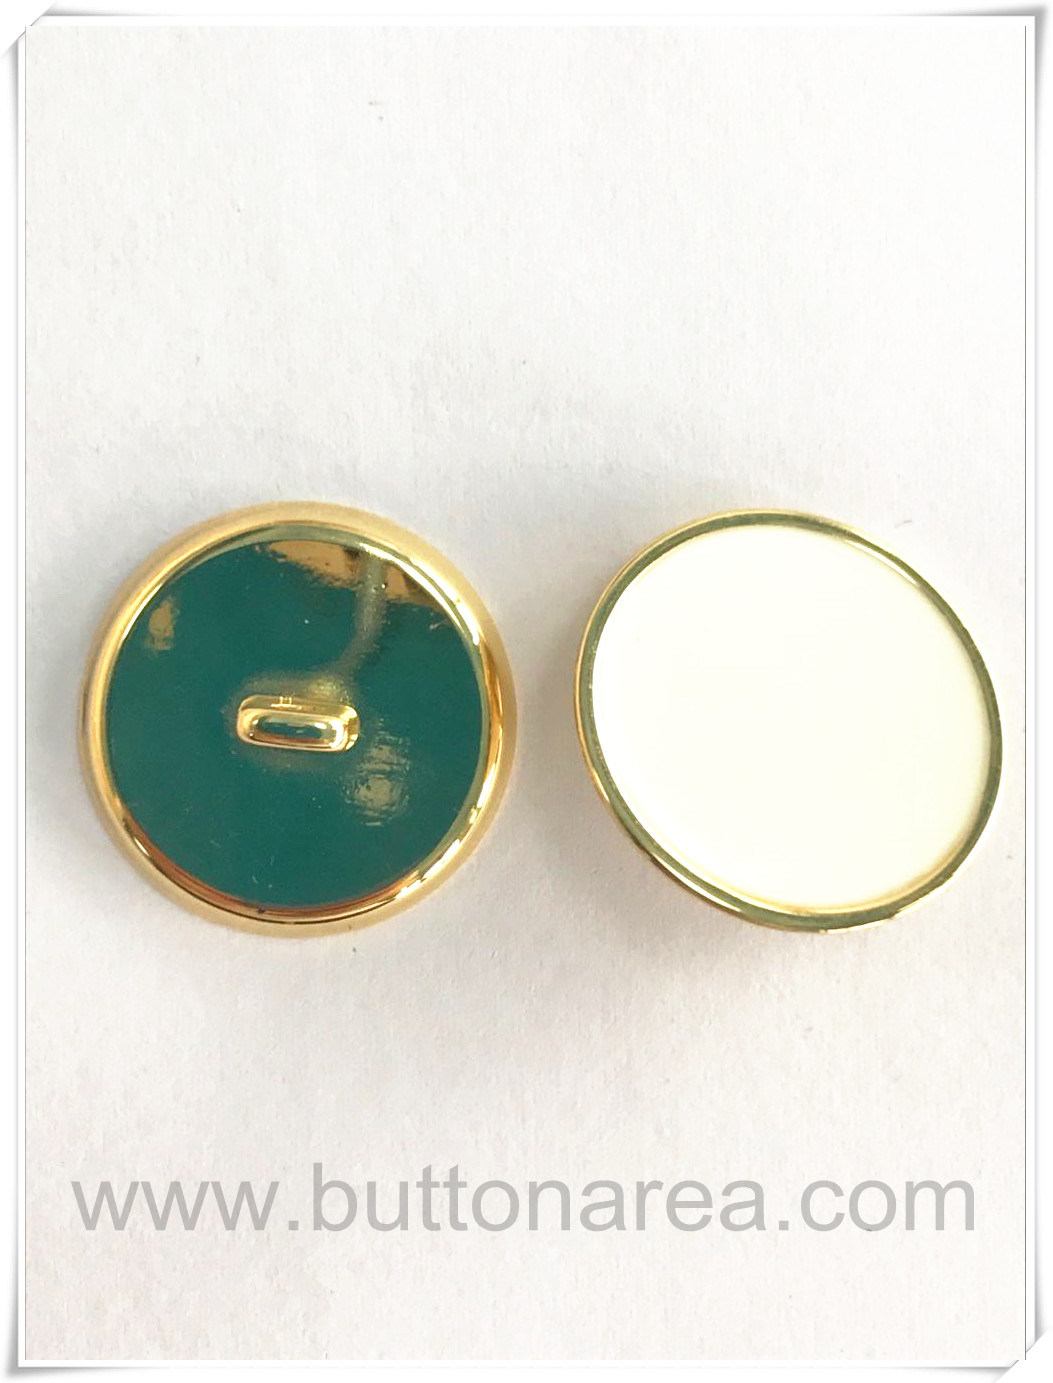 20mm Zinc Alloy Sew on Button for Overcoat Garments